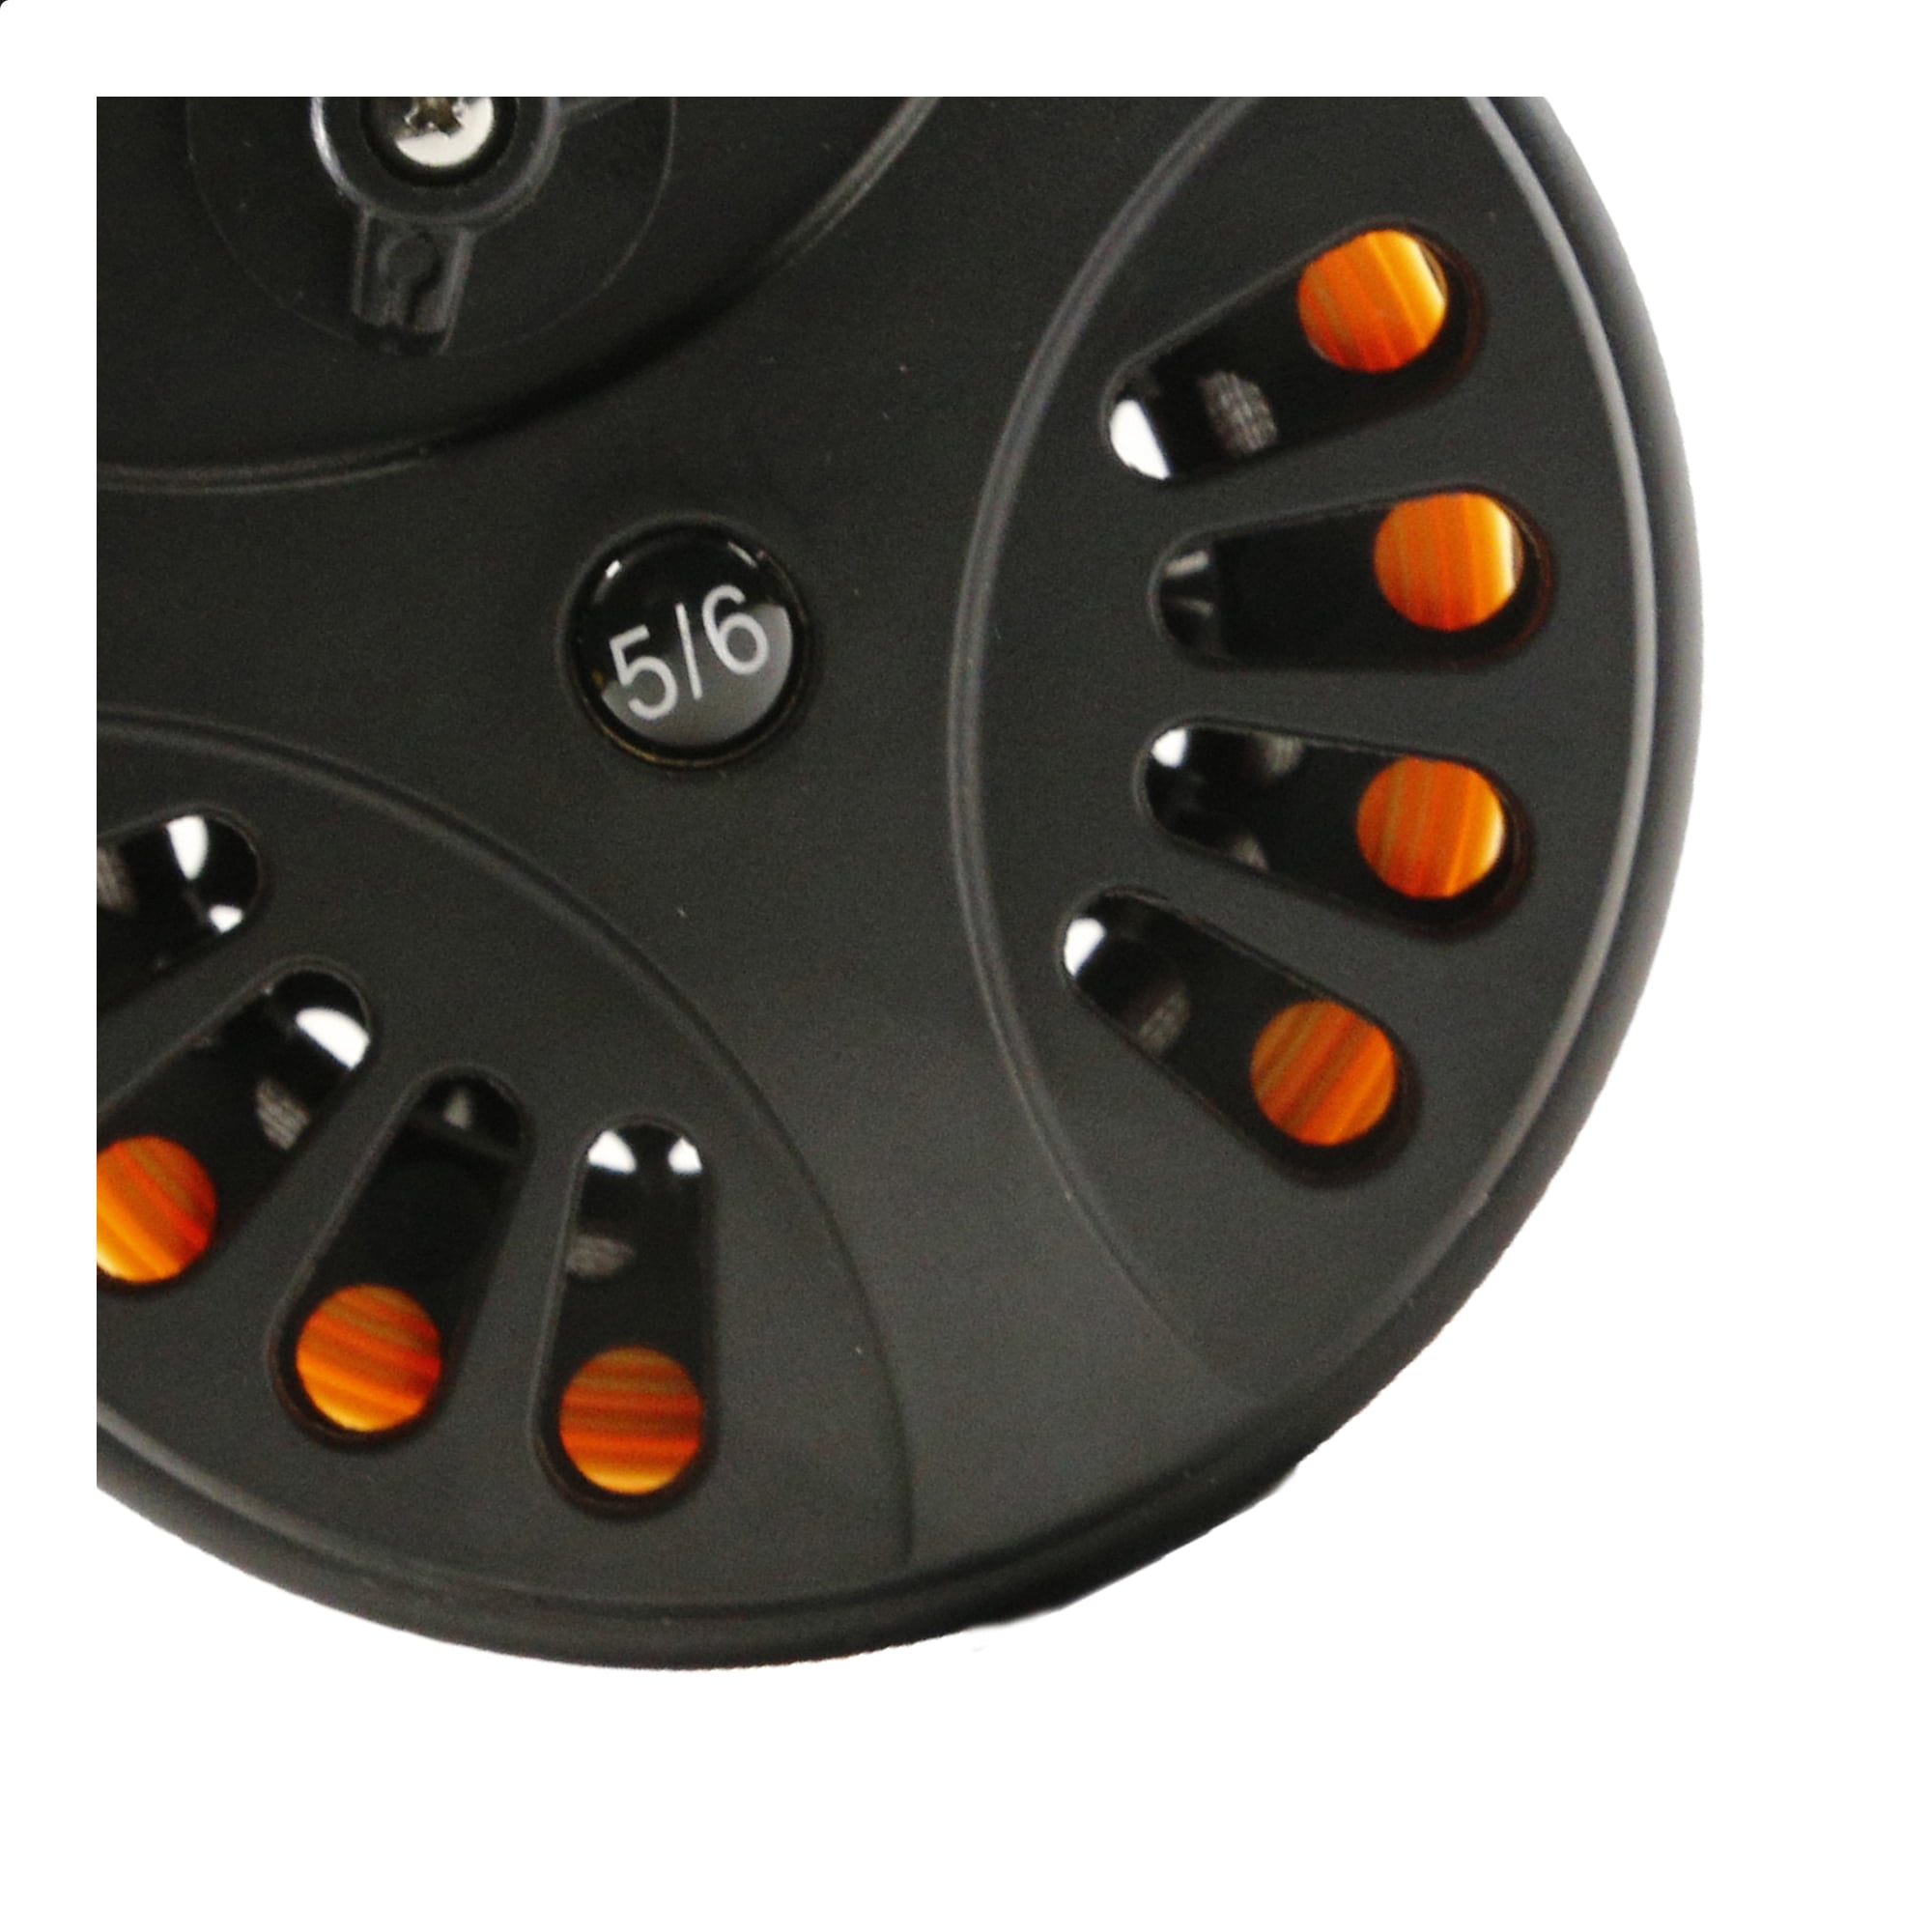 Cortland Fairplay Pre-Spooled Fly Fishing Reel, Size 5/6 WT, 3.75